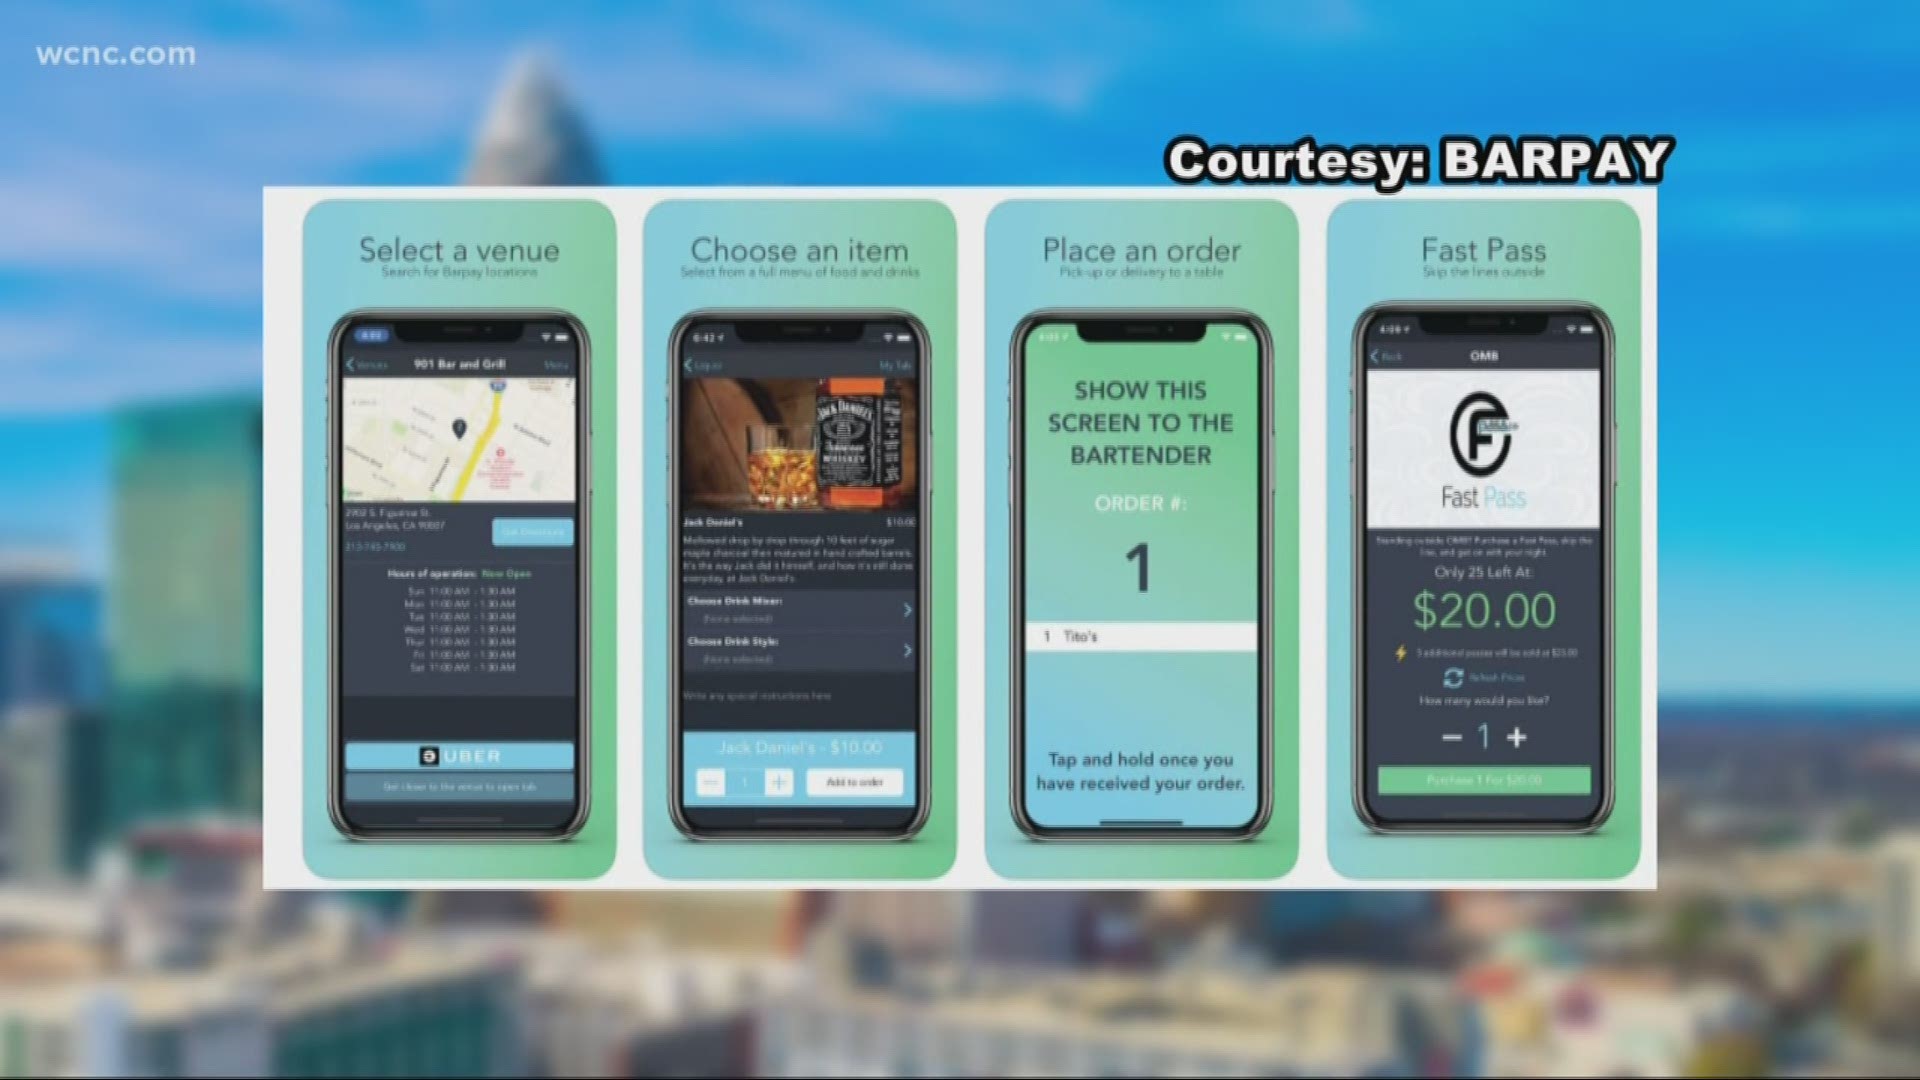 Barpay, a new app that just launched in Charlotte, will help you skip the lines at a busy bar. Simply use your phone to place an order and show the bartender your order number. It's available at about a dozen establishments in the Queen City.